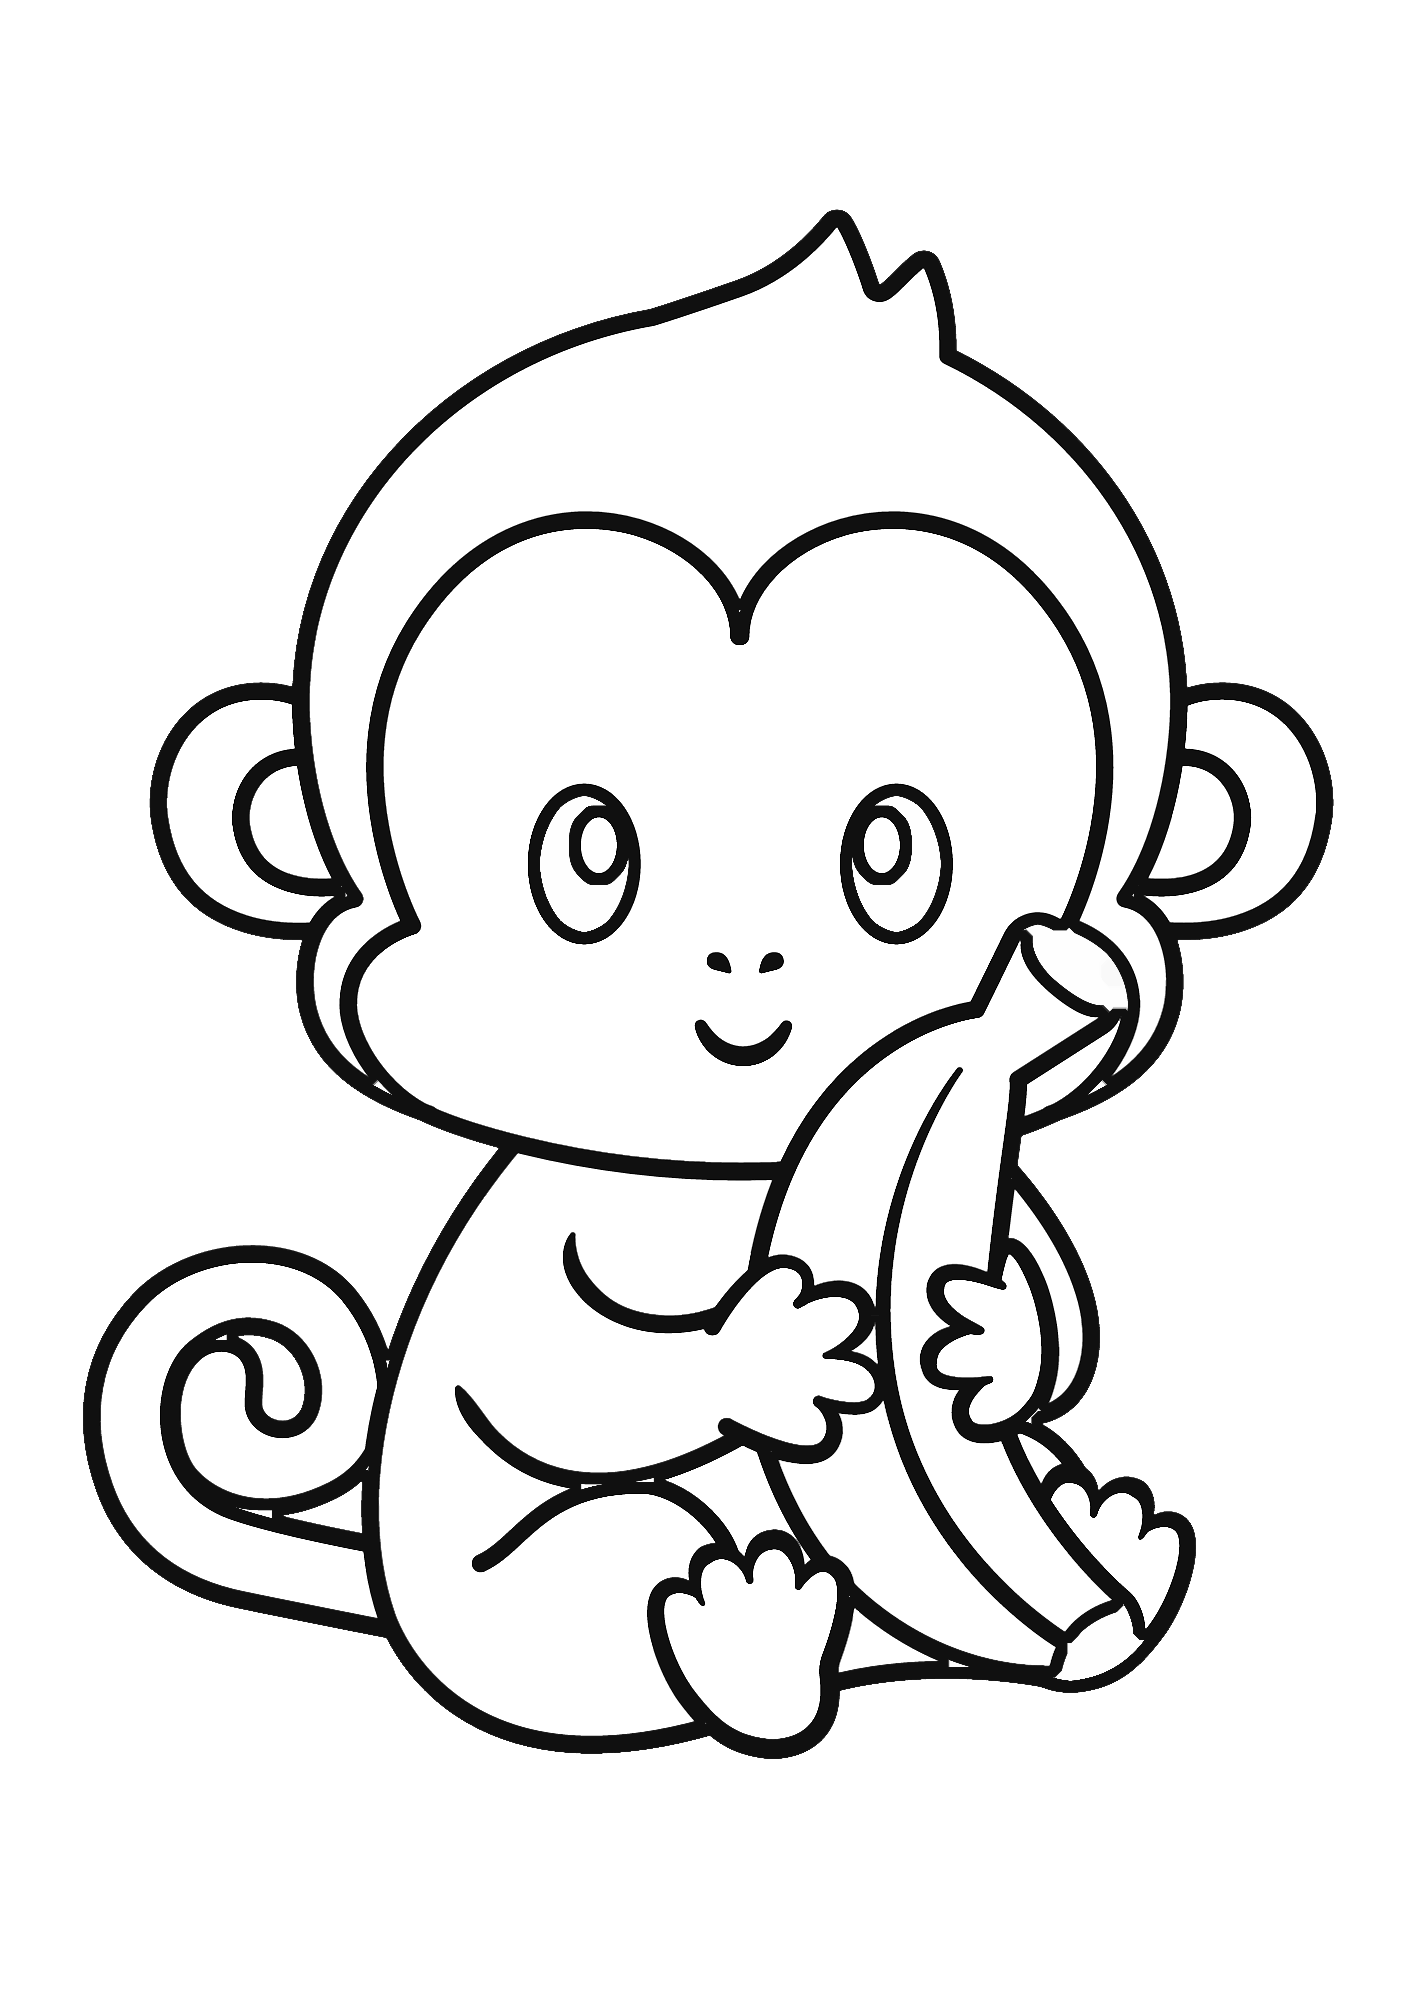 Sweet Monkey Coloring Page